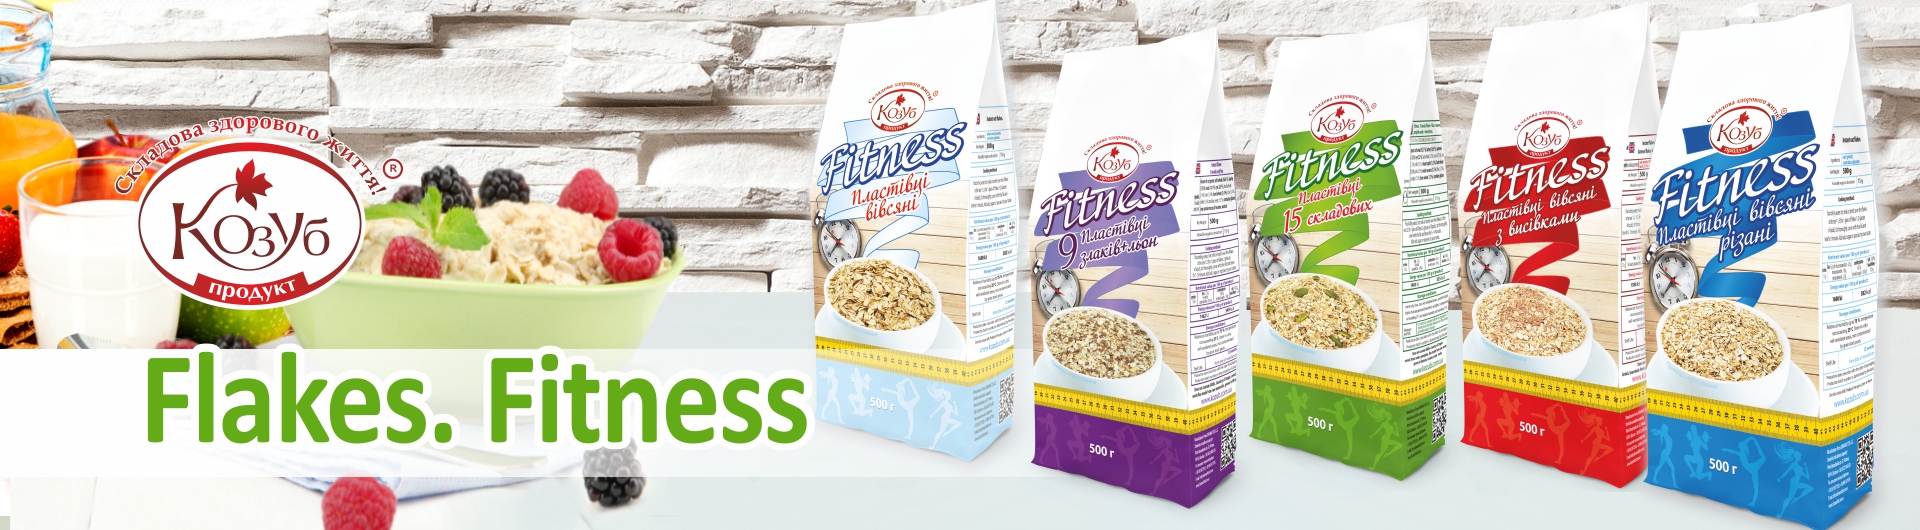 Flakes. Fitness